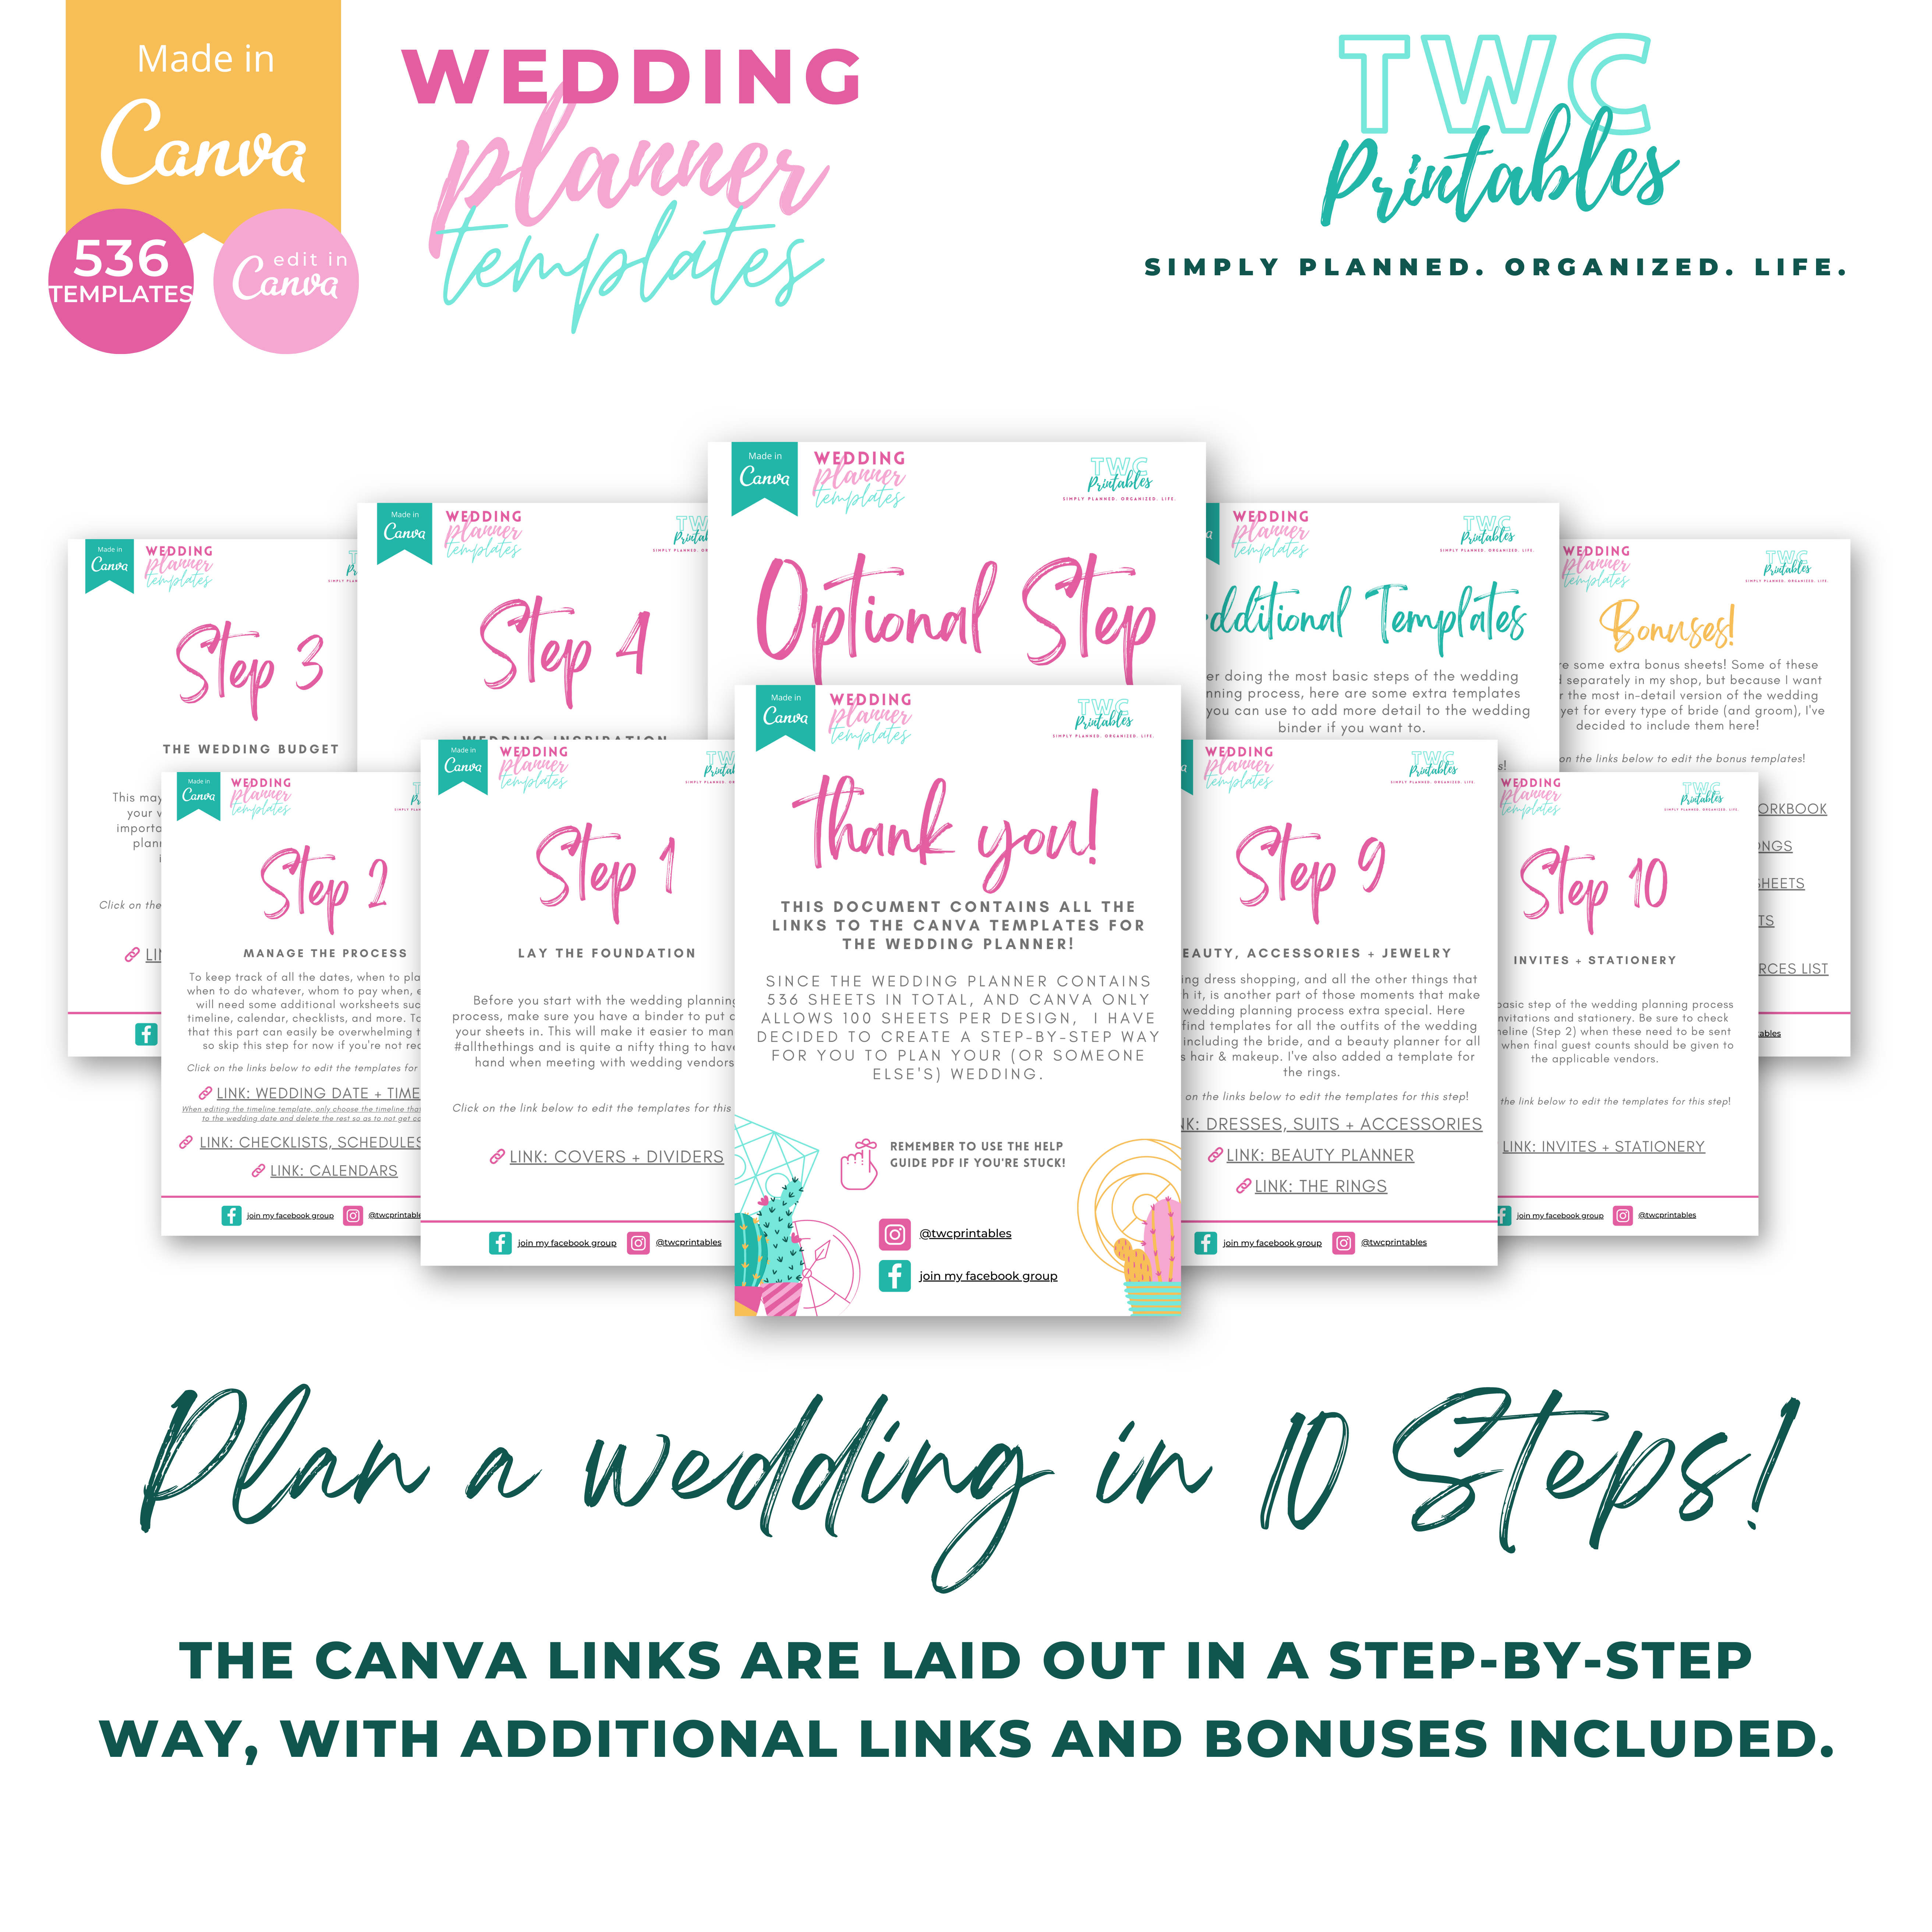 This is it! The editable wedding planner templates for Canva! With over 530 sheets to edit, the wedding binder template for Canva contains everything you need to plan your dream wedding. Use these templates to create your own wedding planner binder, or edit and print everything out to create a complete wedding binder! Simply edit this template with Canva! It comes in bright colors, but you can change everything in these templates from fonts, colors, elements, shapes, layouts, and more! All you need is a free Canva account! A free Canva guide for beginners is included in your purchase of this listing.